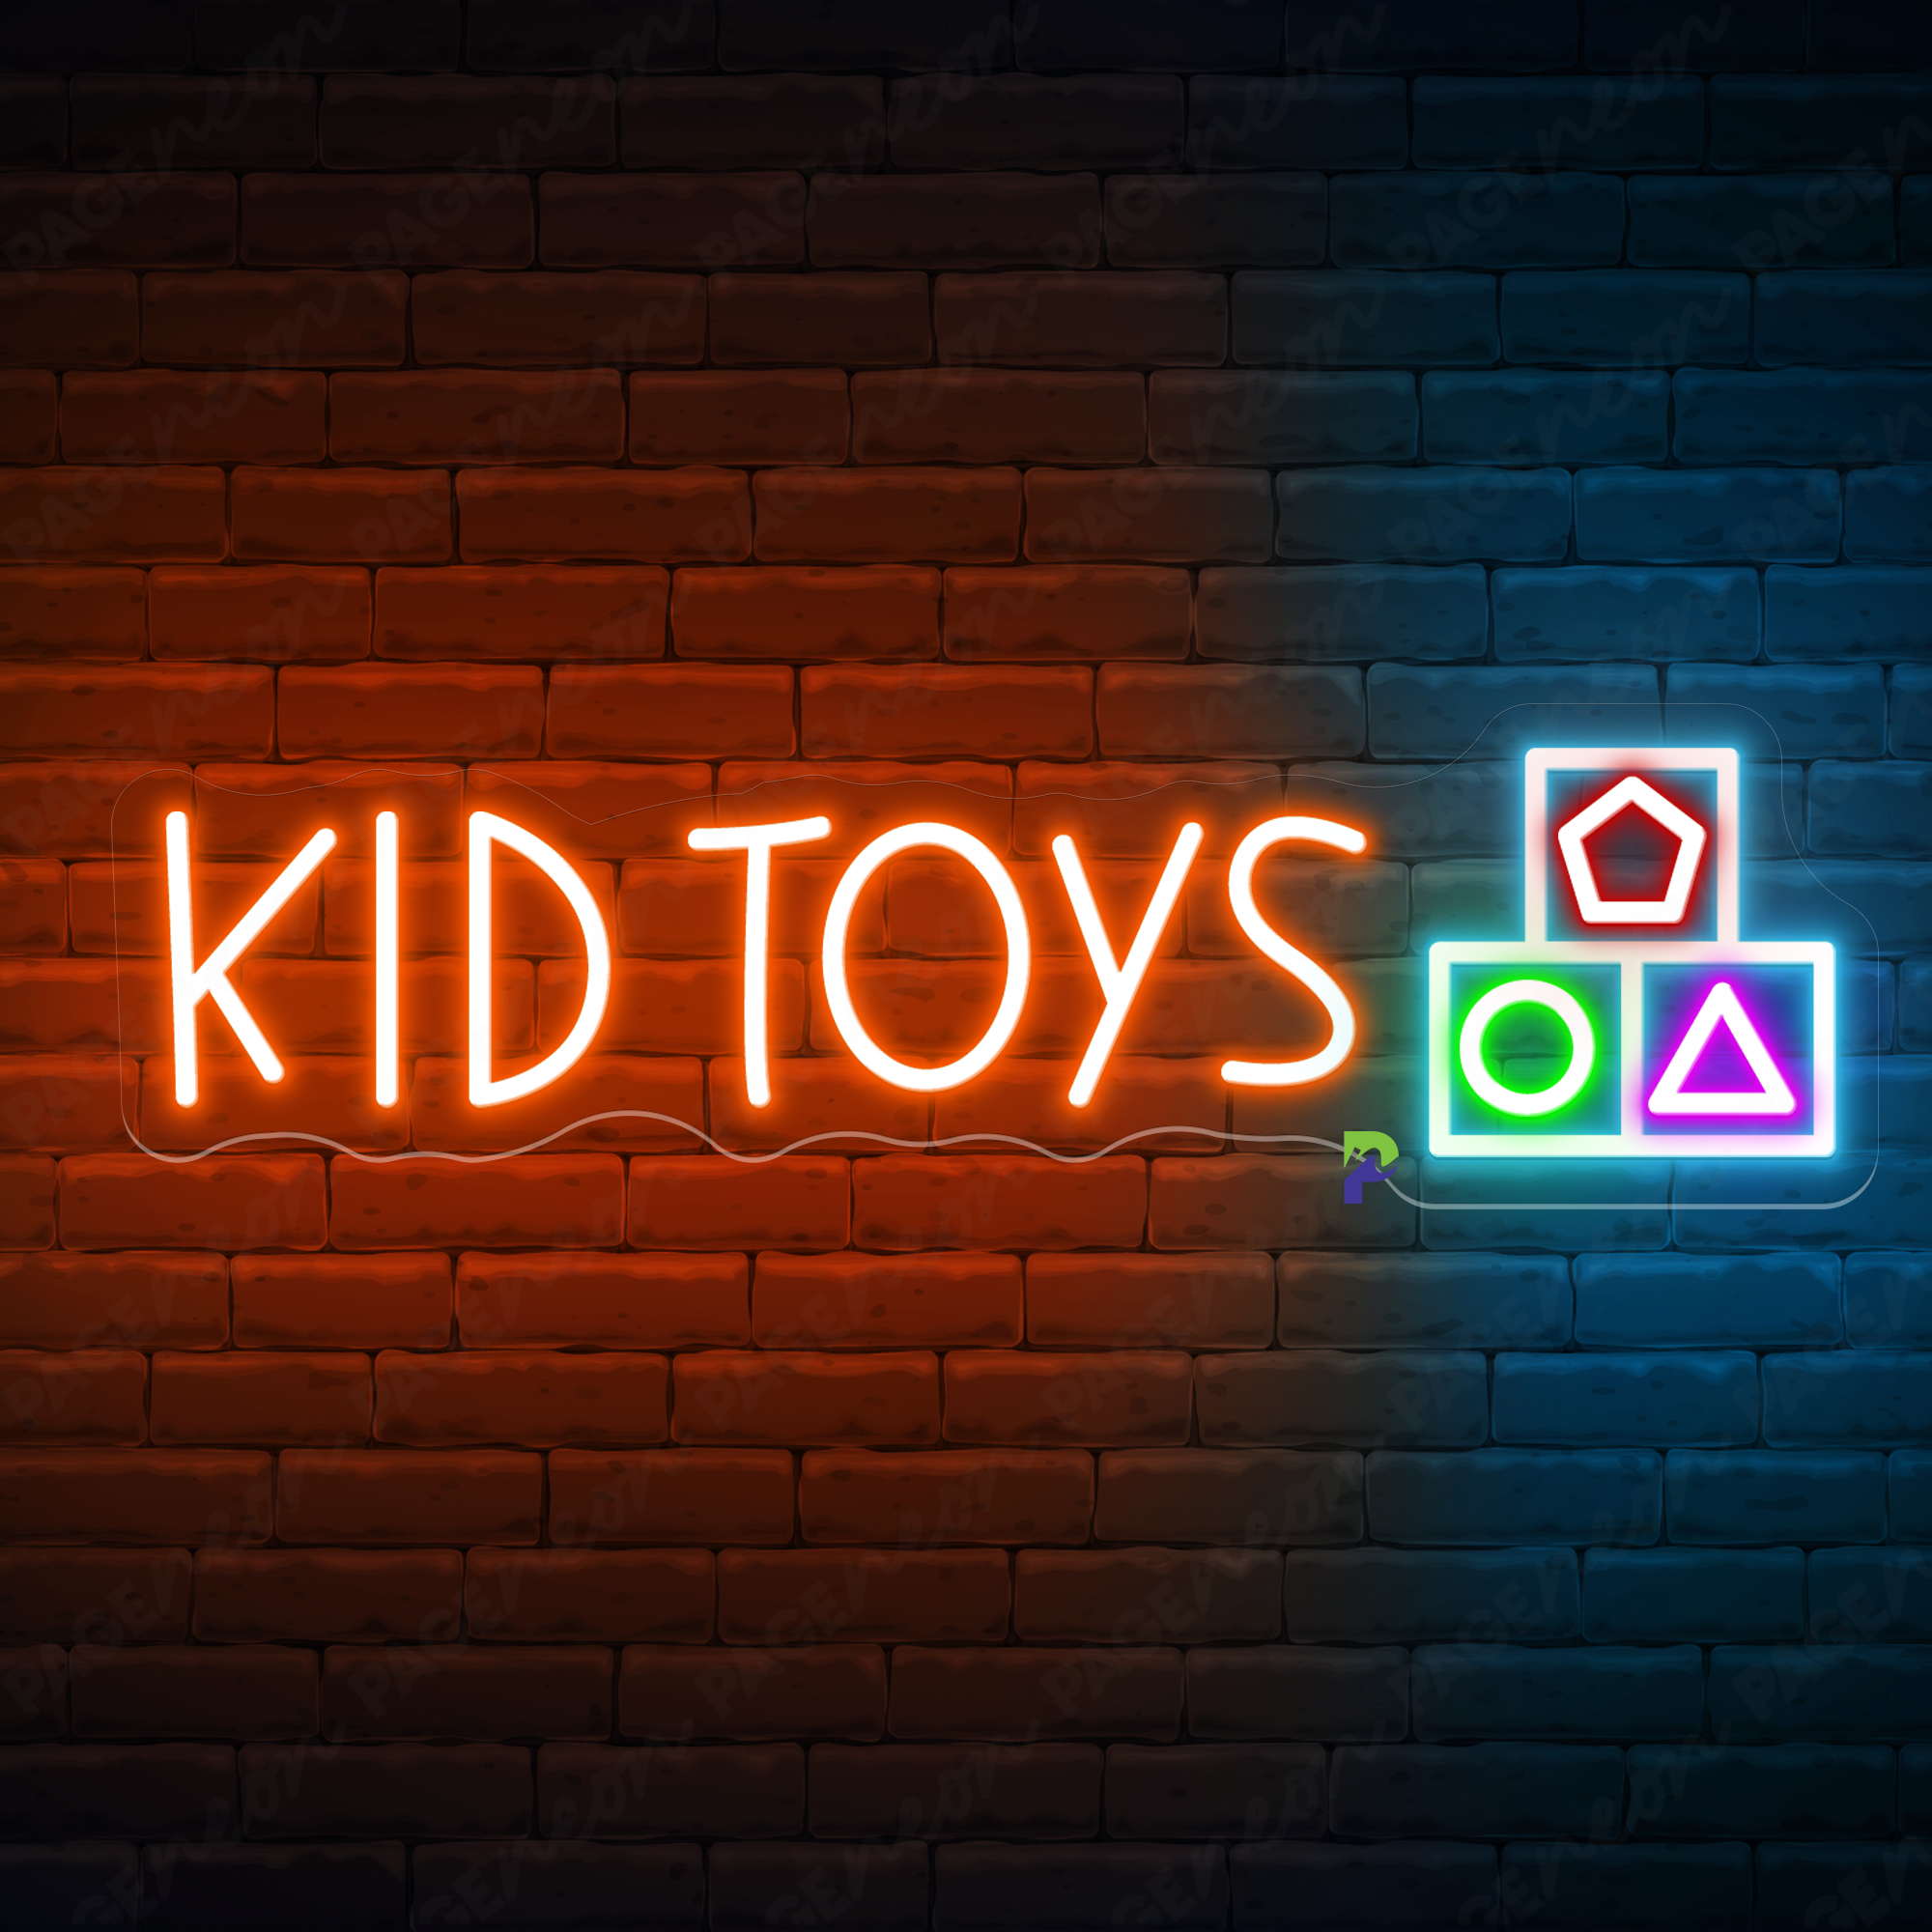 Kid Toys Neon Signs Business Led Light